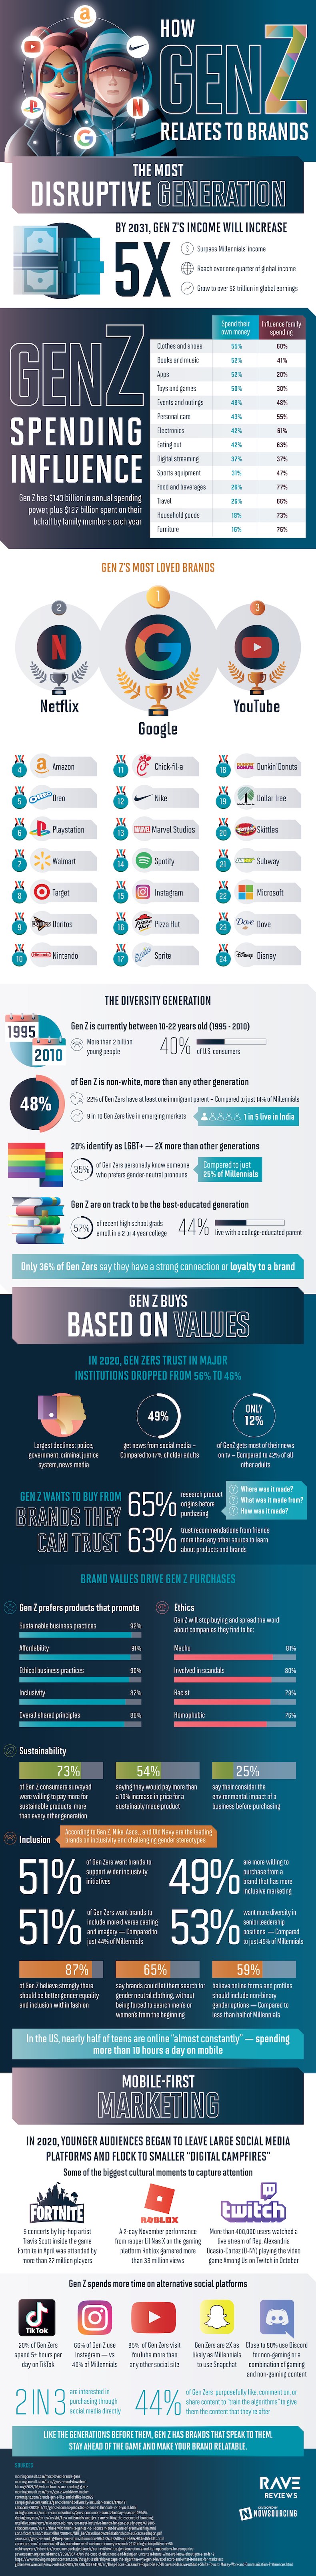 How Gen Z relates to brands infographic